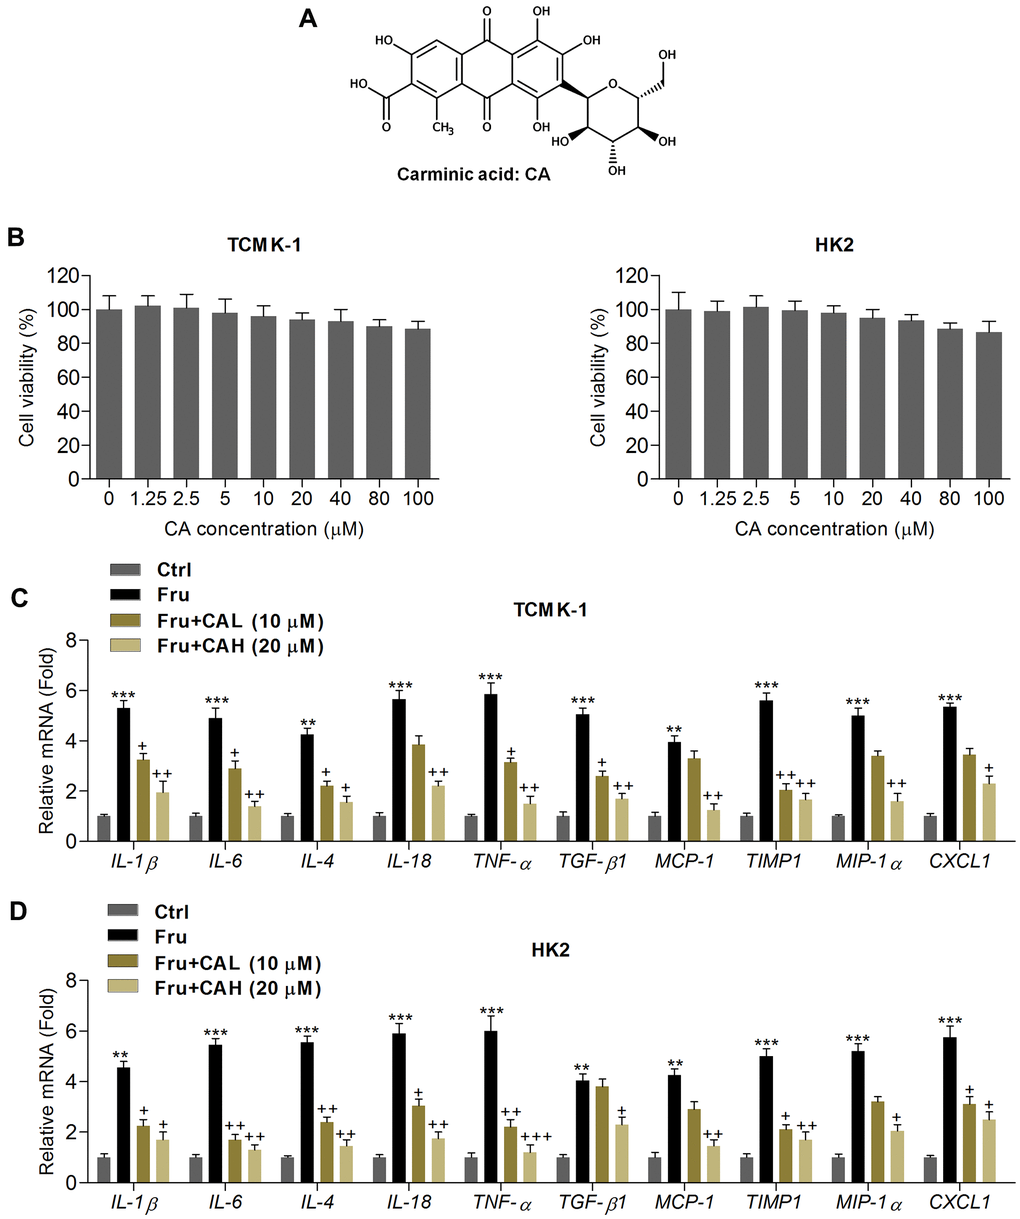 Carminic acid reduces inflammatory response in Fru-incubated cells. (A) Chemical structure of Carminic acid (CA). (B) The mouse tubular epithelial cell line TCMK-1 and human kidney cell line of HK2 were incubated with CA (0, 1.25, 2.5, 5, 10, 20, 40, 80 and 100 μM) for 24 h. Then, all cells were collected for cell viability measurement using MTT analysis. (C, D) TCMK-1 and HK2 cells were exposed to Fru (5 mM) for 24 h with or without CA (10 and 20 μM). Then, all cells were harvested for the calculation of inflammatory factors using RT-qPCR analysis. The results are expressed as the means ± SEM. n = 4 in each group. **P***P+P++P